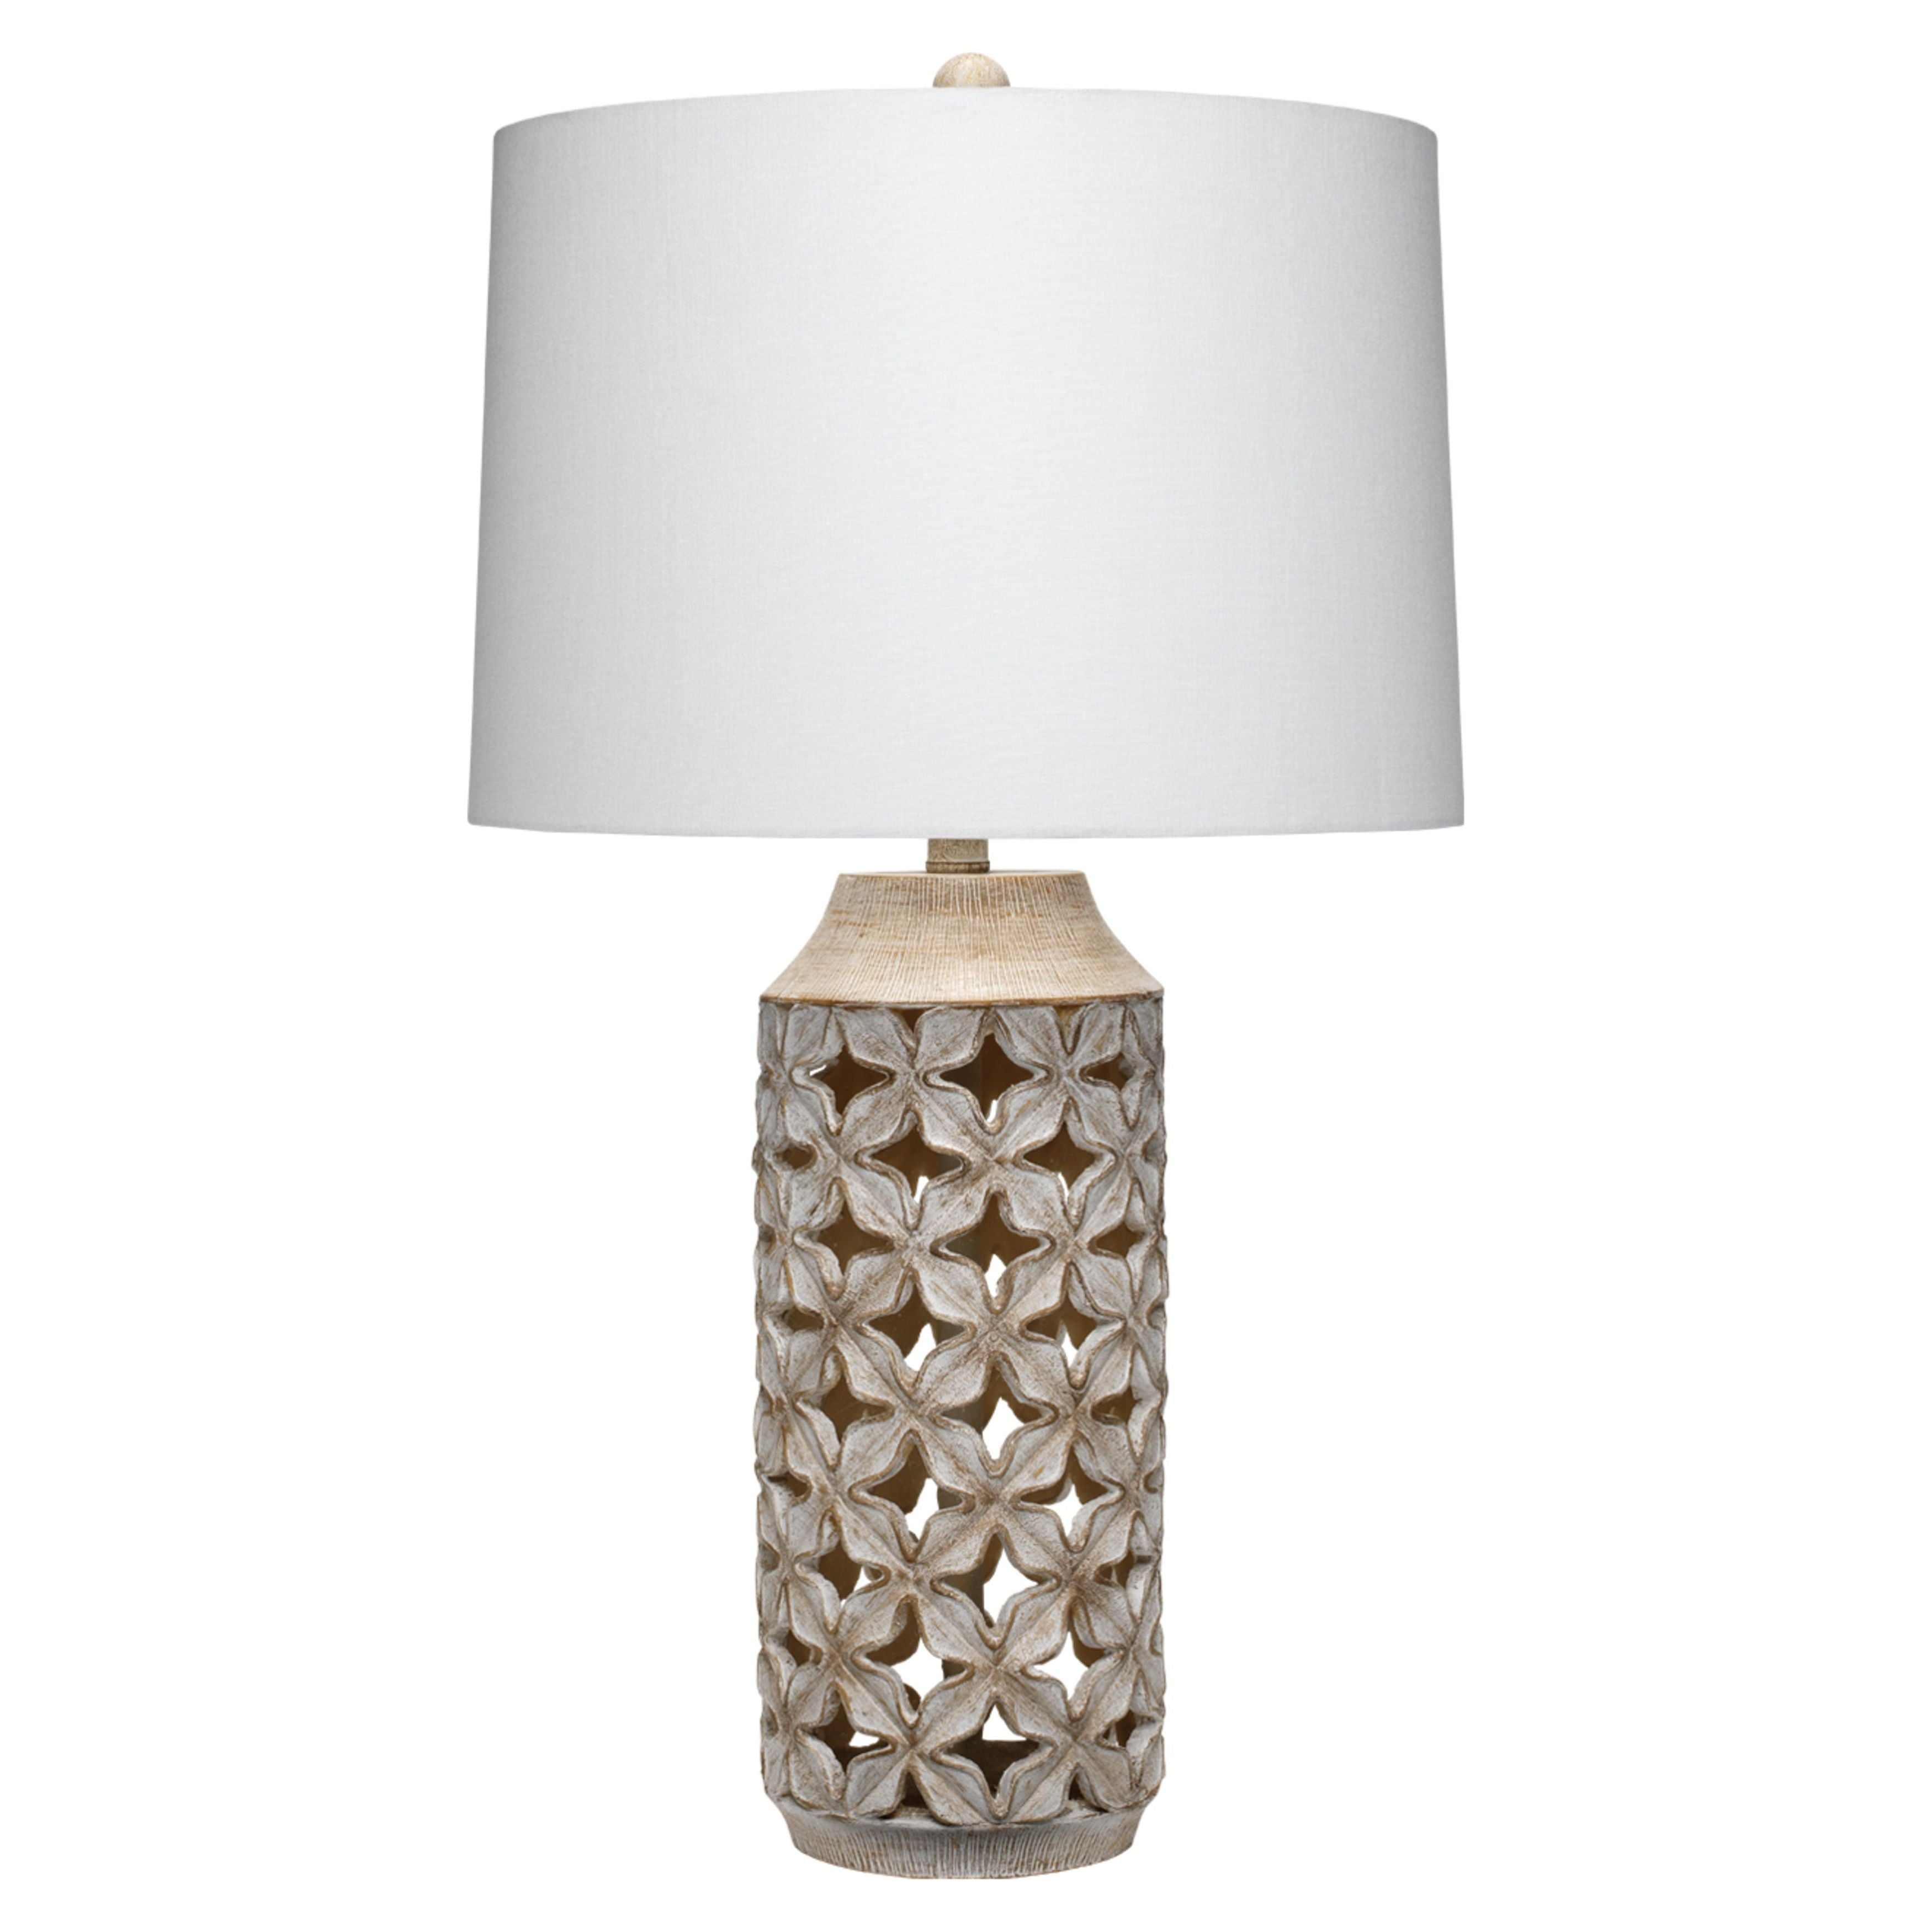 Jamie Young Company - LSFLORAWH - Flora Table Lamp - Flora - White Wash